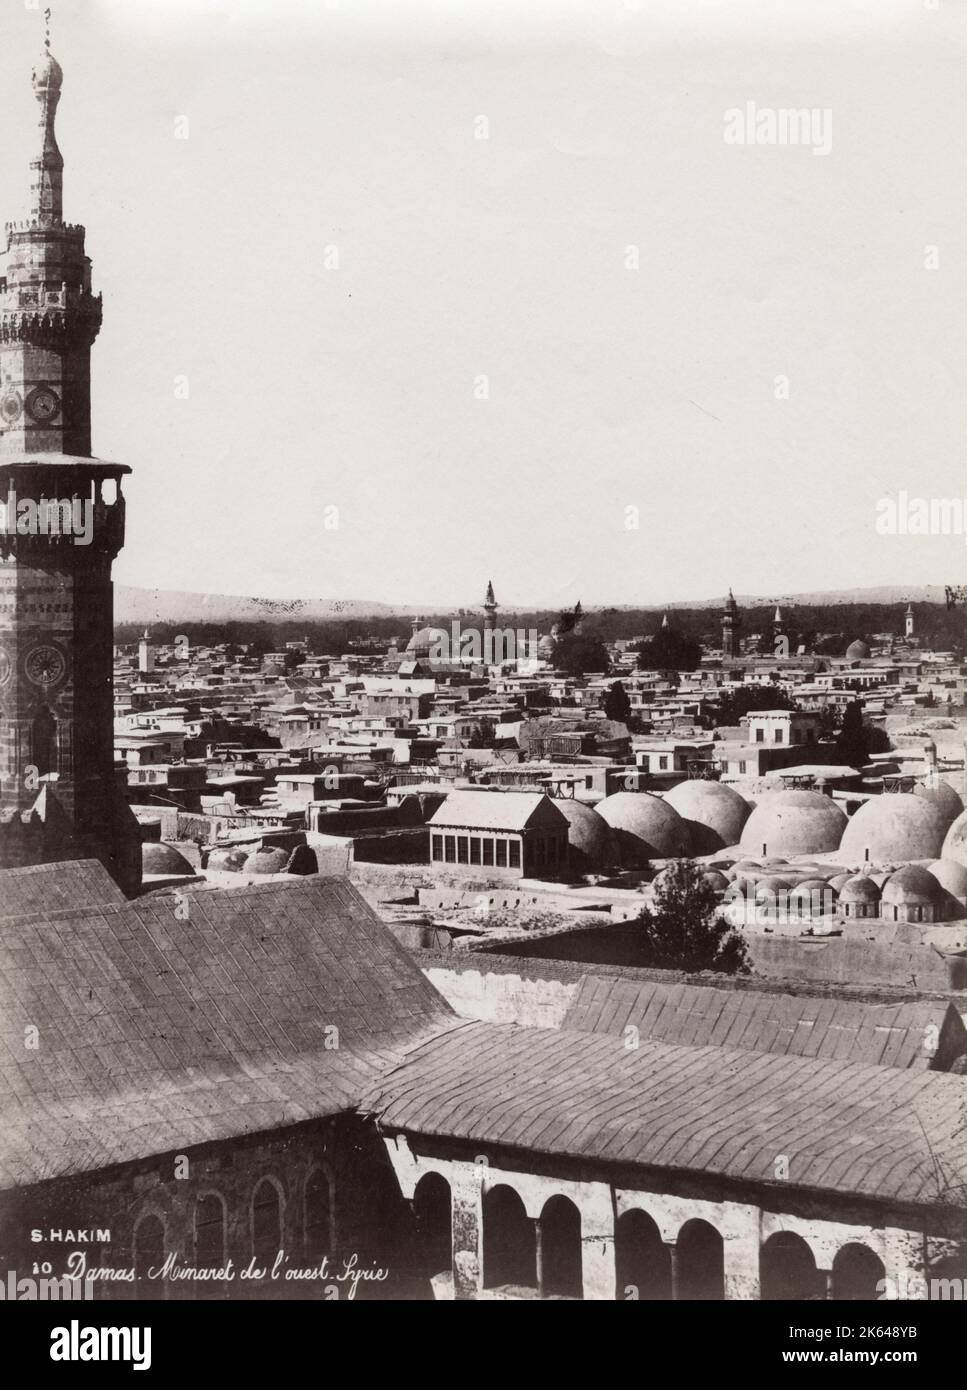 19th century vintage photograph - rooftop view of Damascus taken from the minaret of a mosque, c.1890. Stock Photo